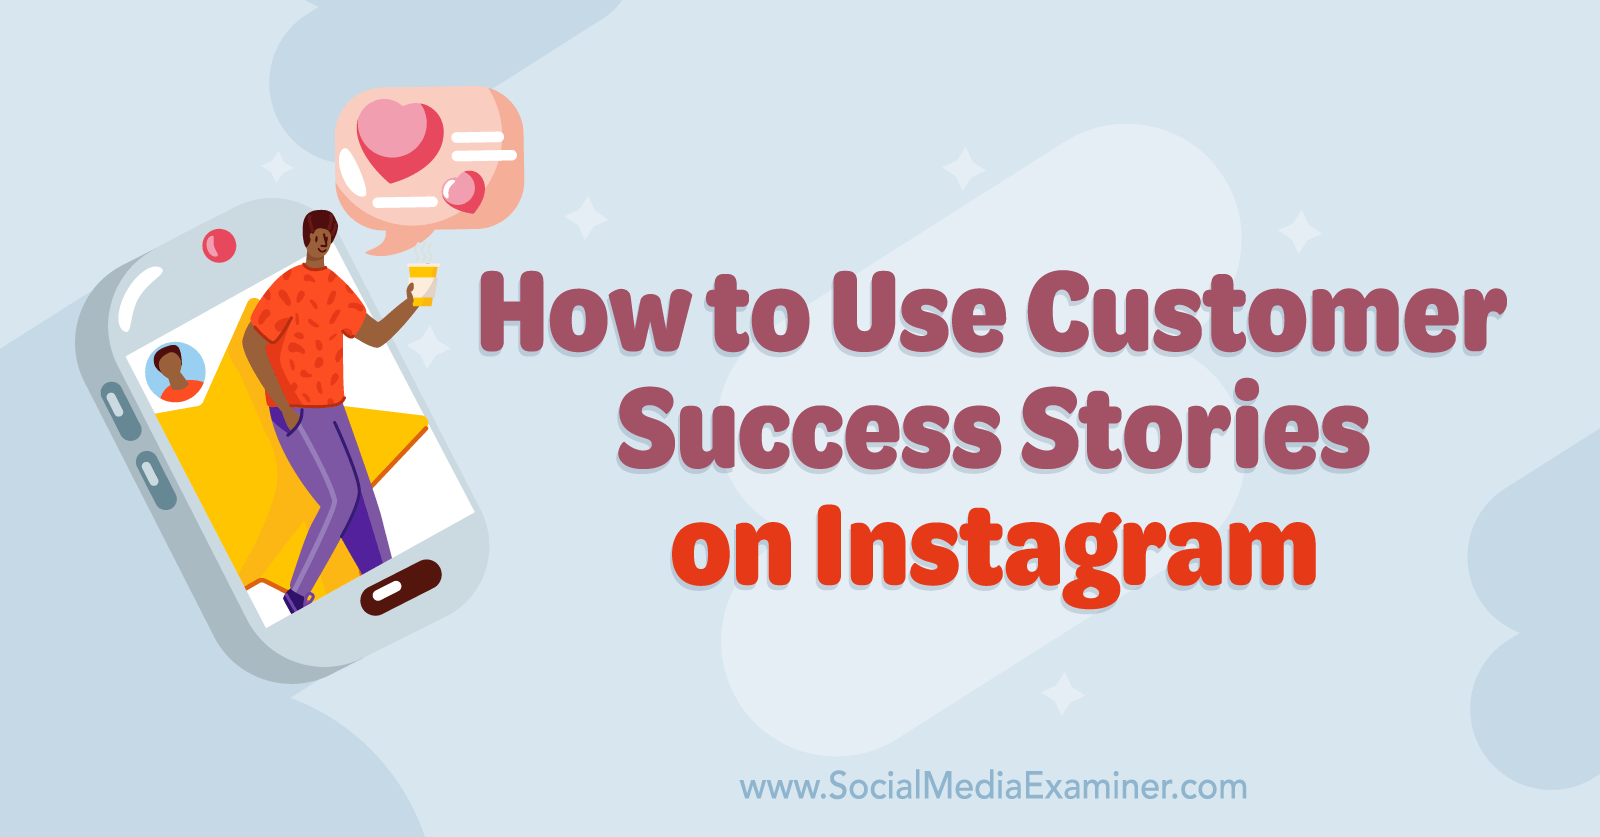 How to Use Customer Success Stories on Instagram by Social Media Examiner